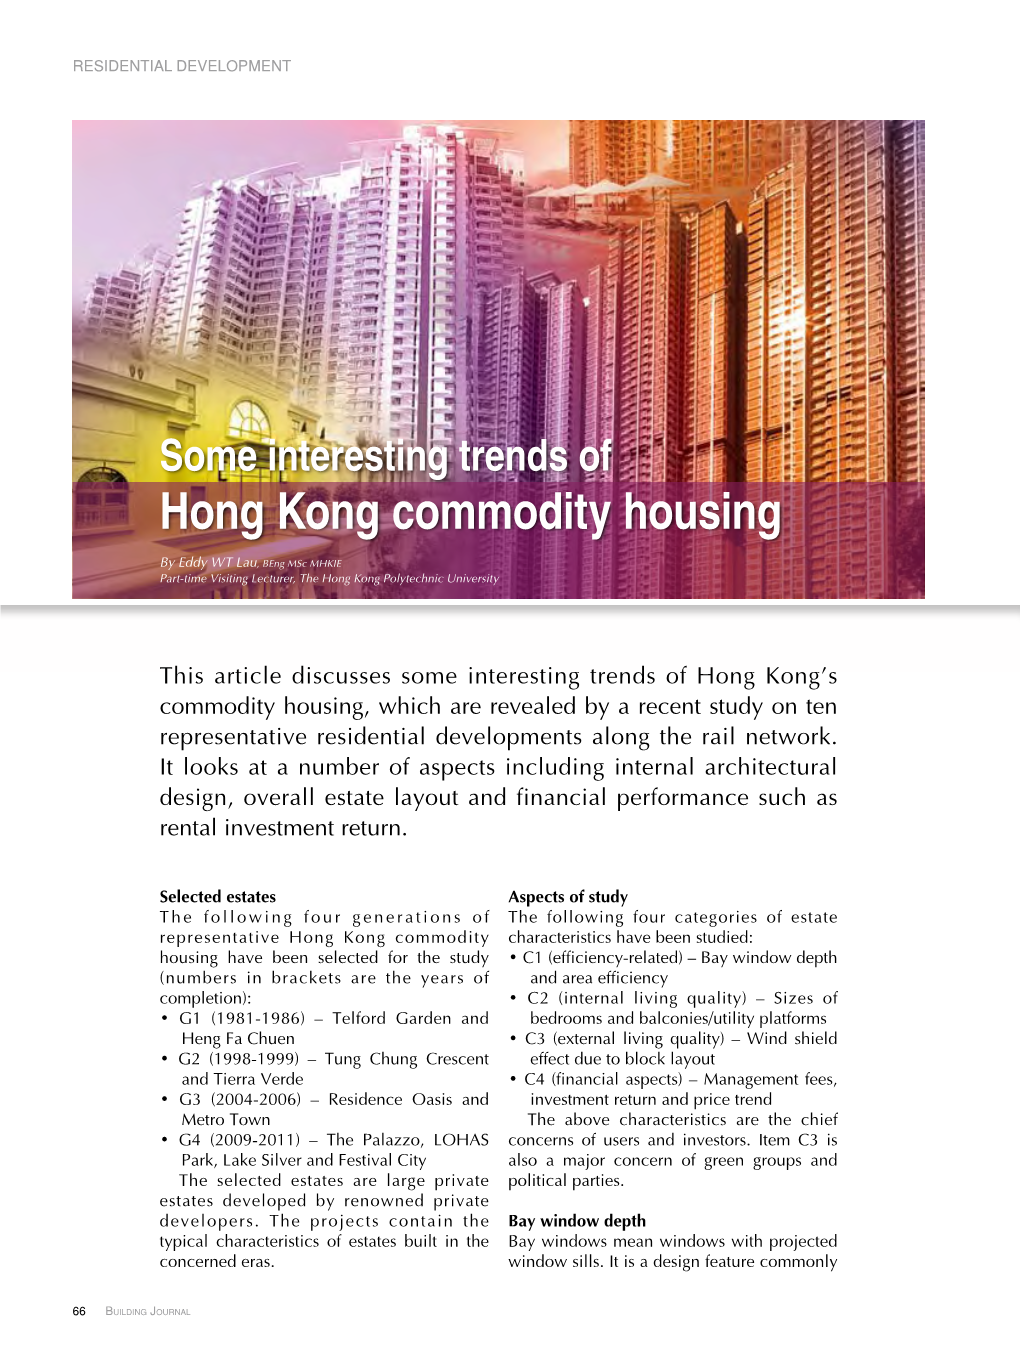 Some Interesting Trends of Hong Kong Commodity Housing